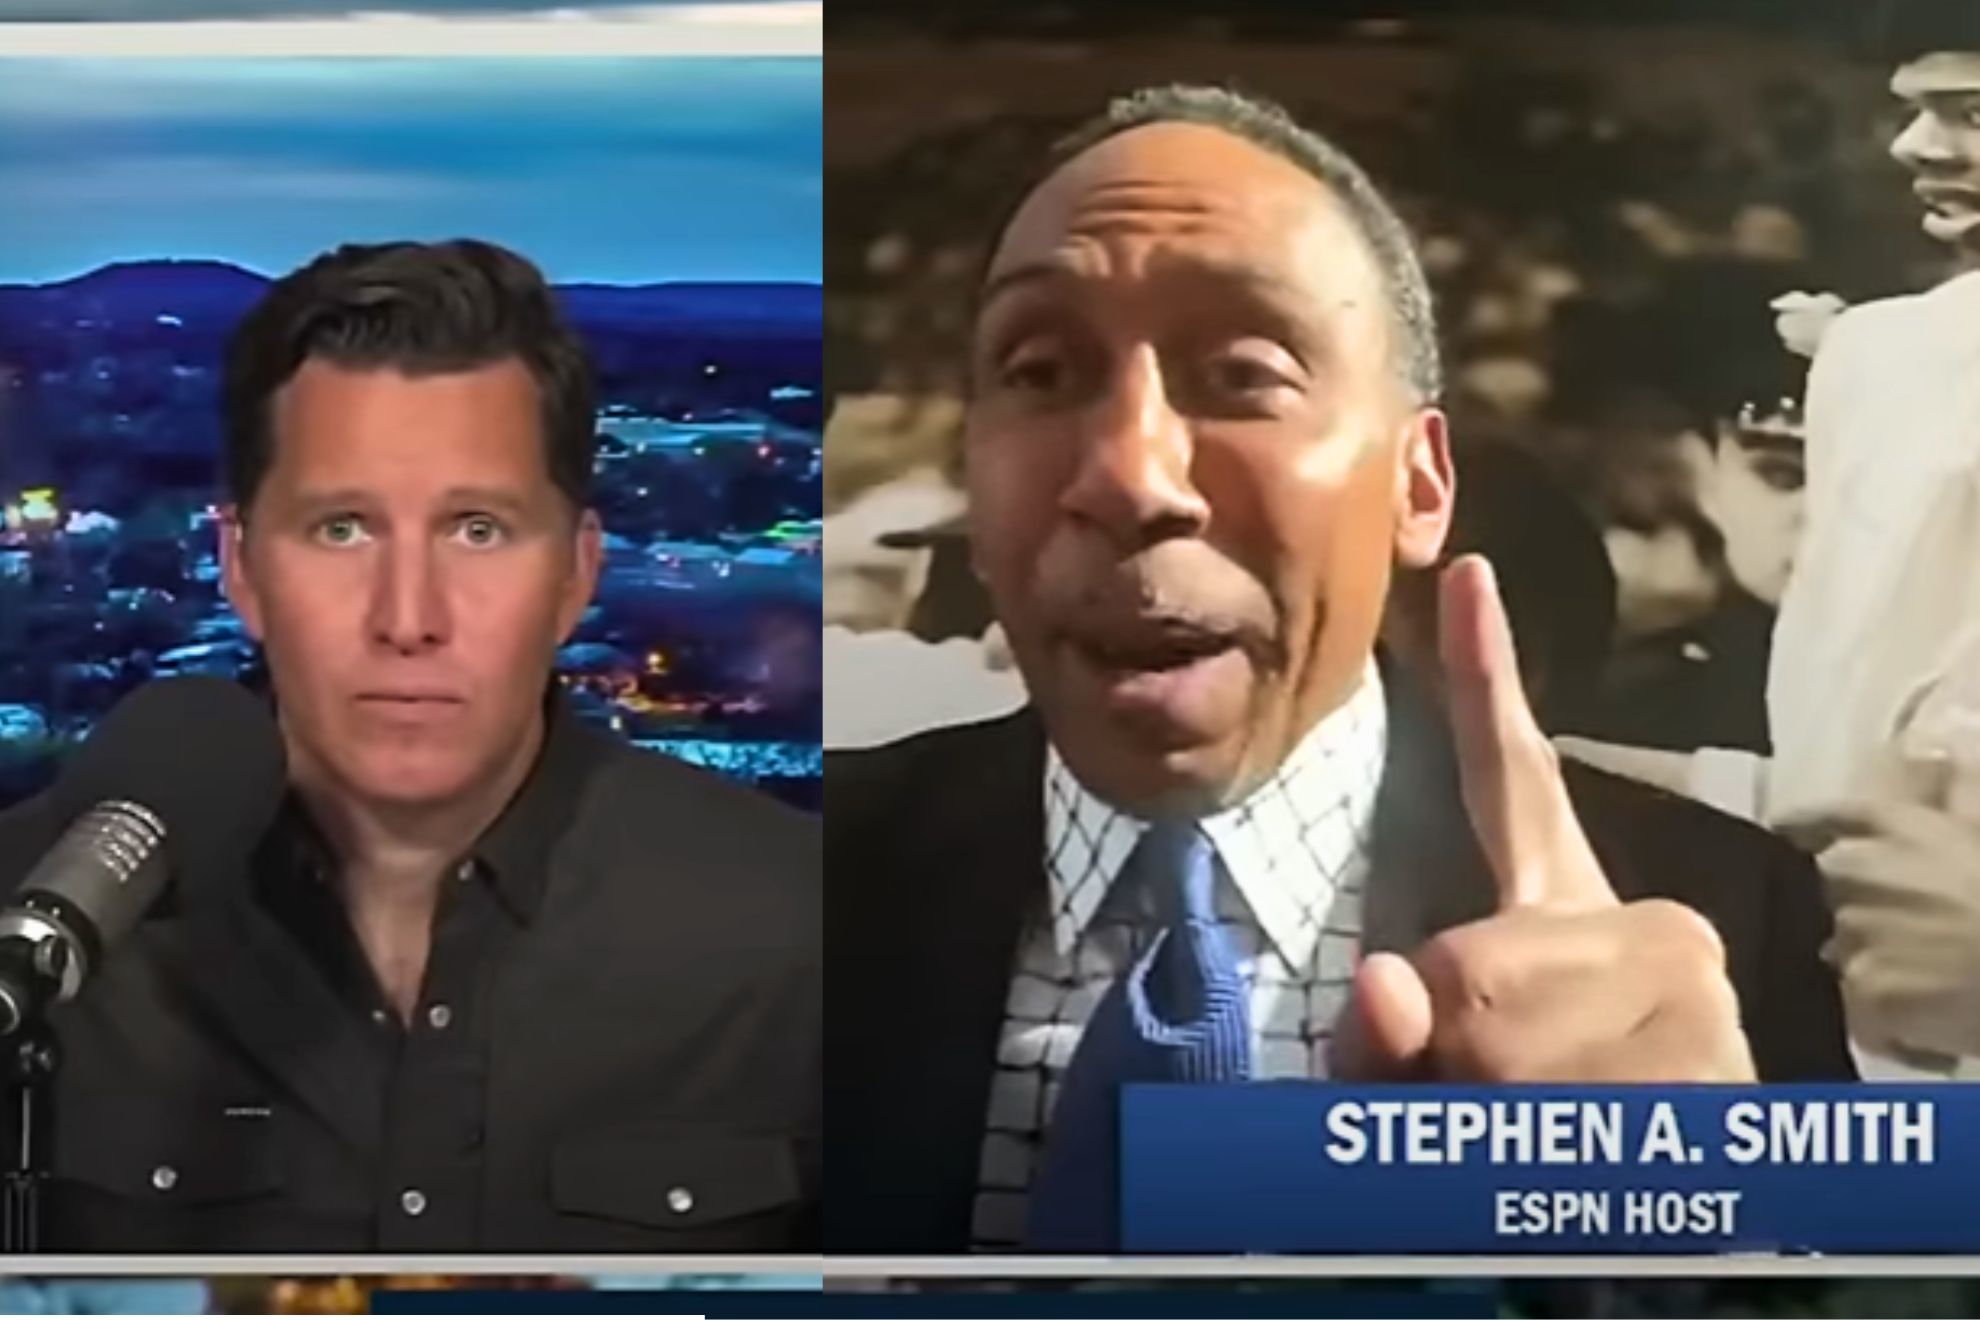 Stephen A. Smith shut down his former colleague, Will Cain, on his own show.